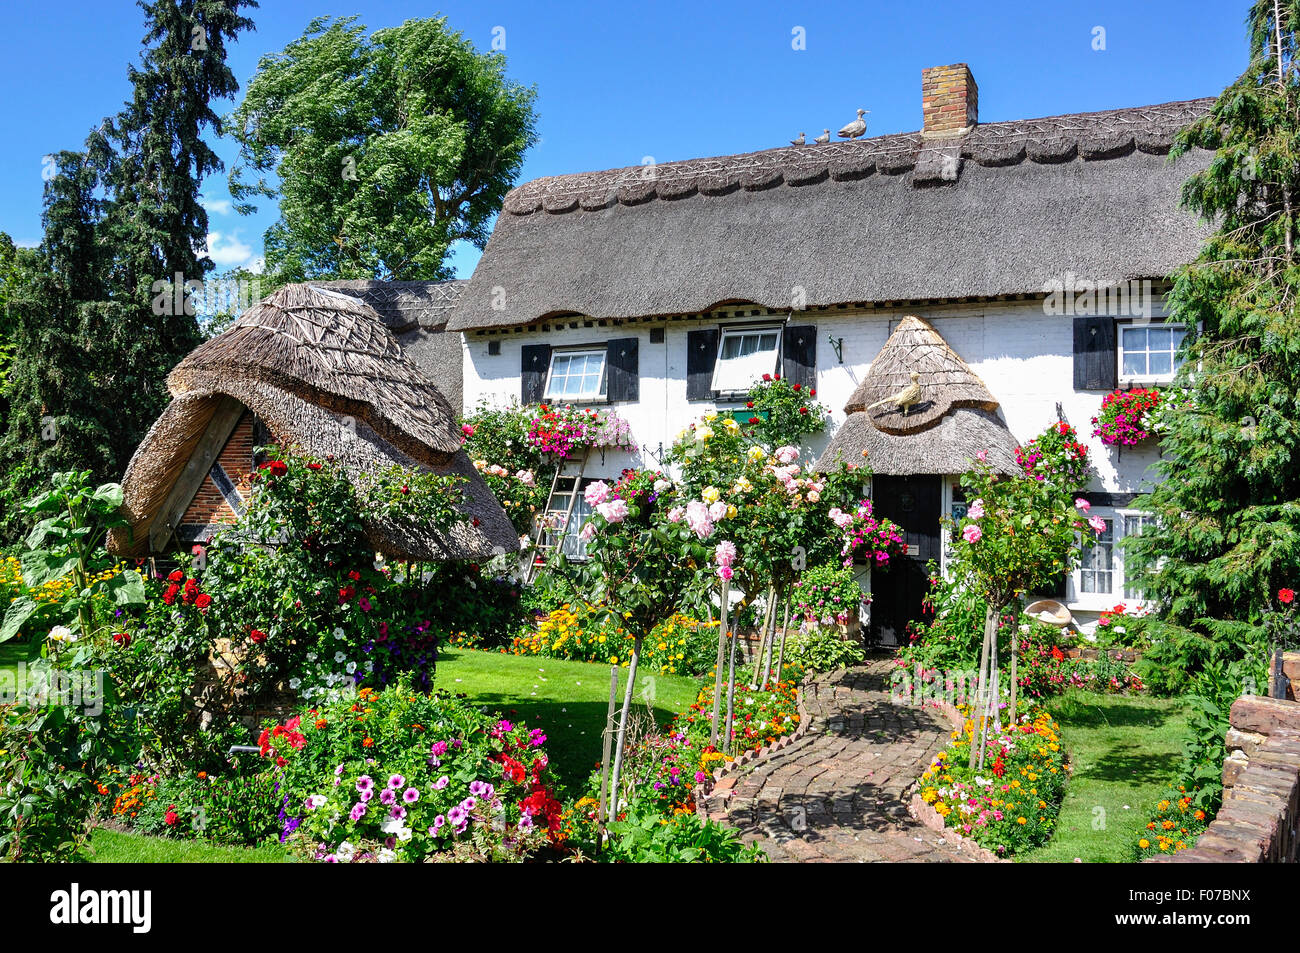 Pretty thatched cottage and garden, Longford Village, London Borough of Hillingdon, Greater London, England, United Kingdom Stock Photo